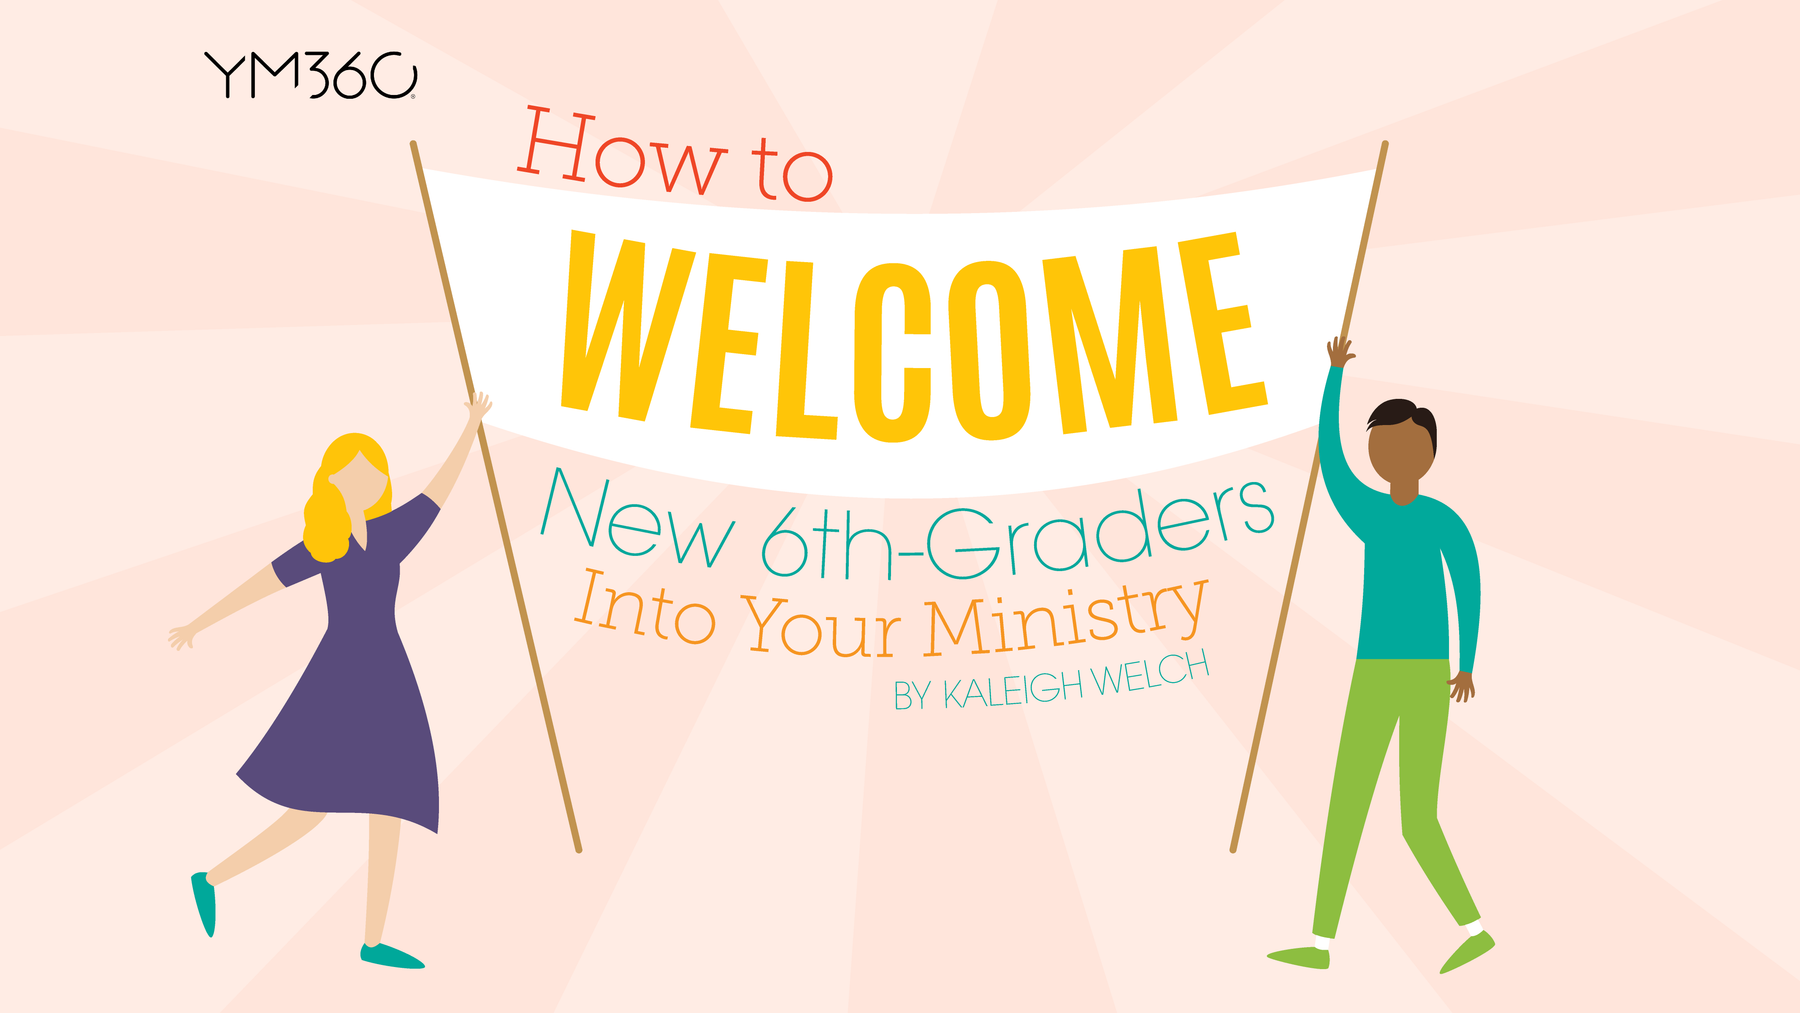 How to Welcome New 6th Graders into Your Ministry